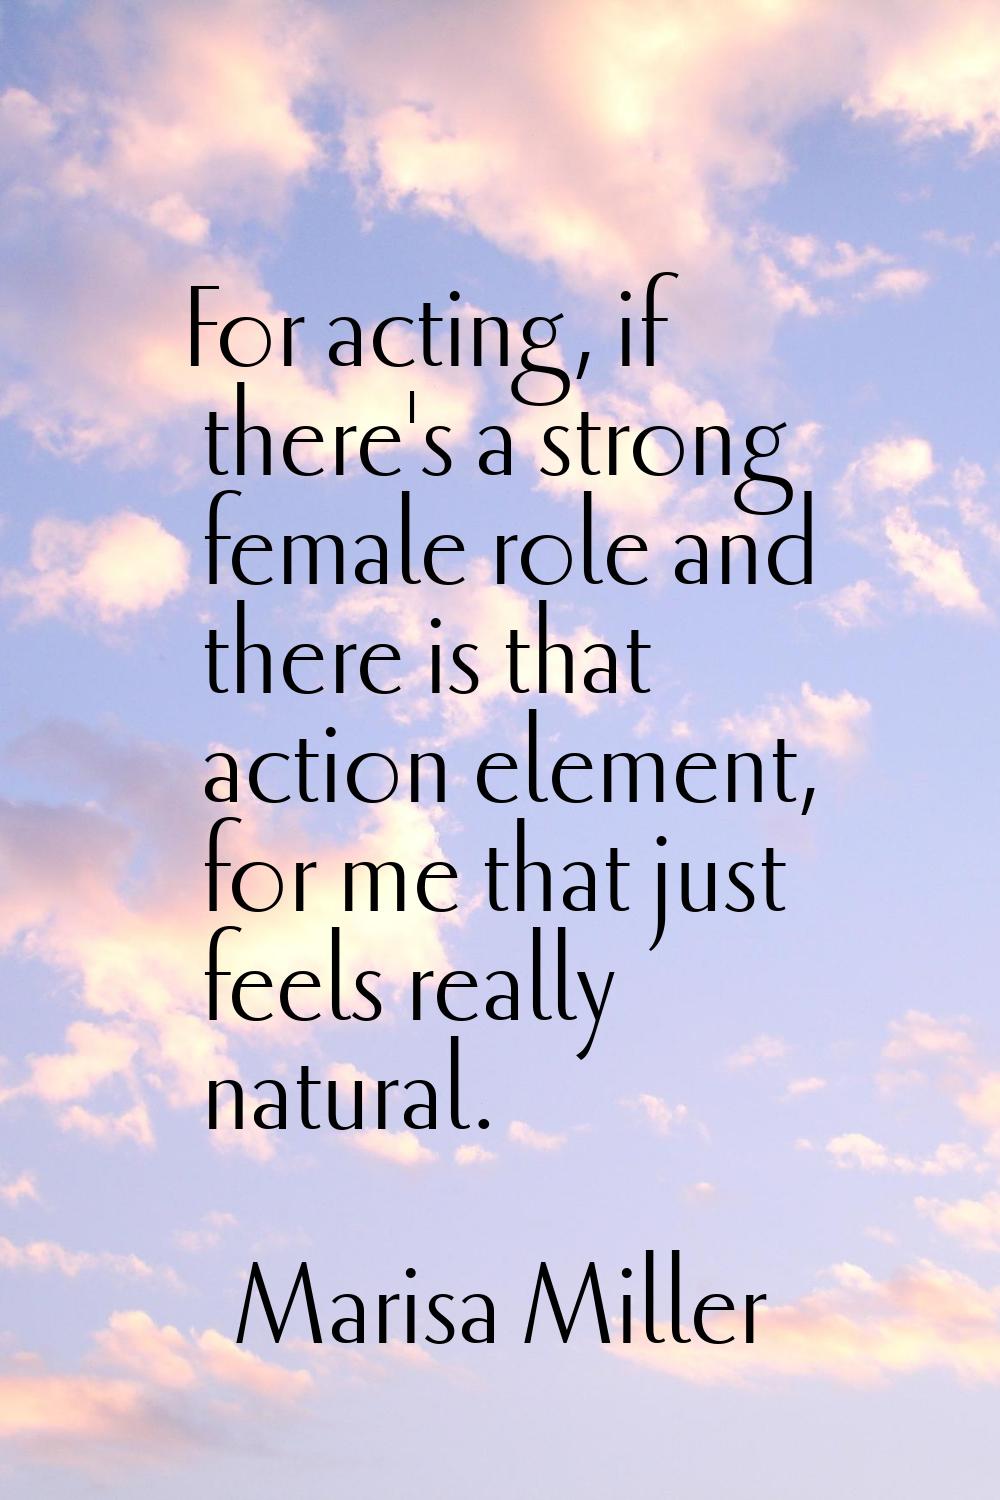 For acting, if there's a strong female role and there is that action element, for me that just feel